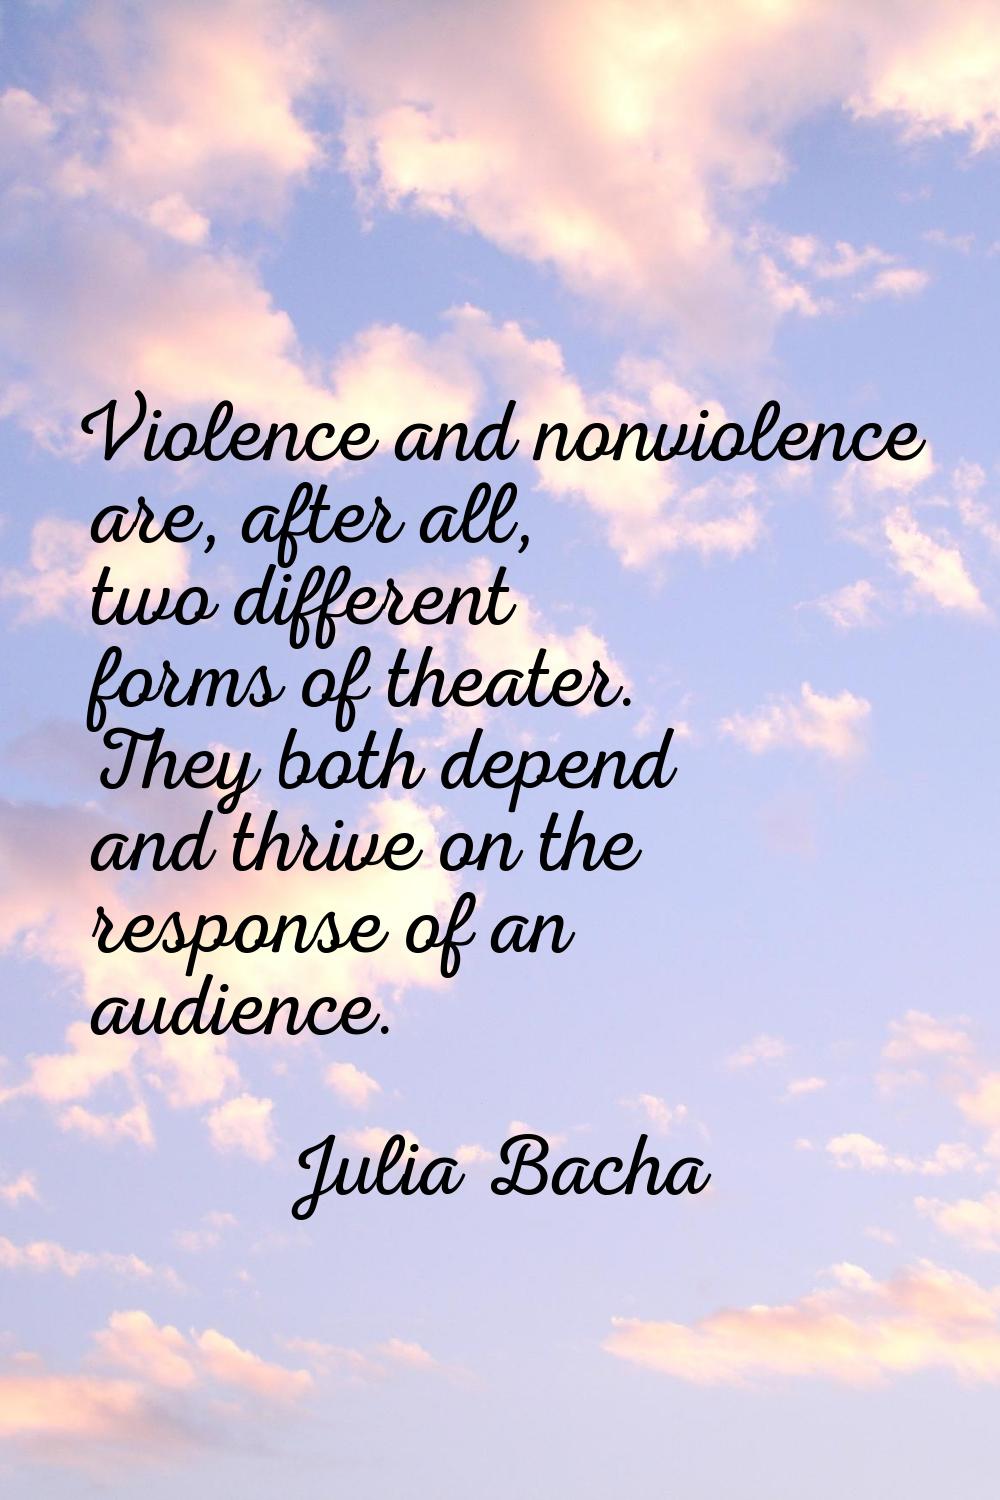 Violence and nonviolence are, after all, two different forms of theater. They both depend and thriv